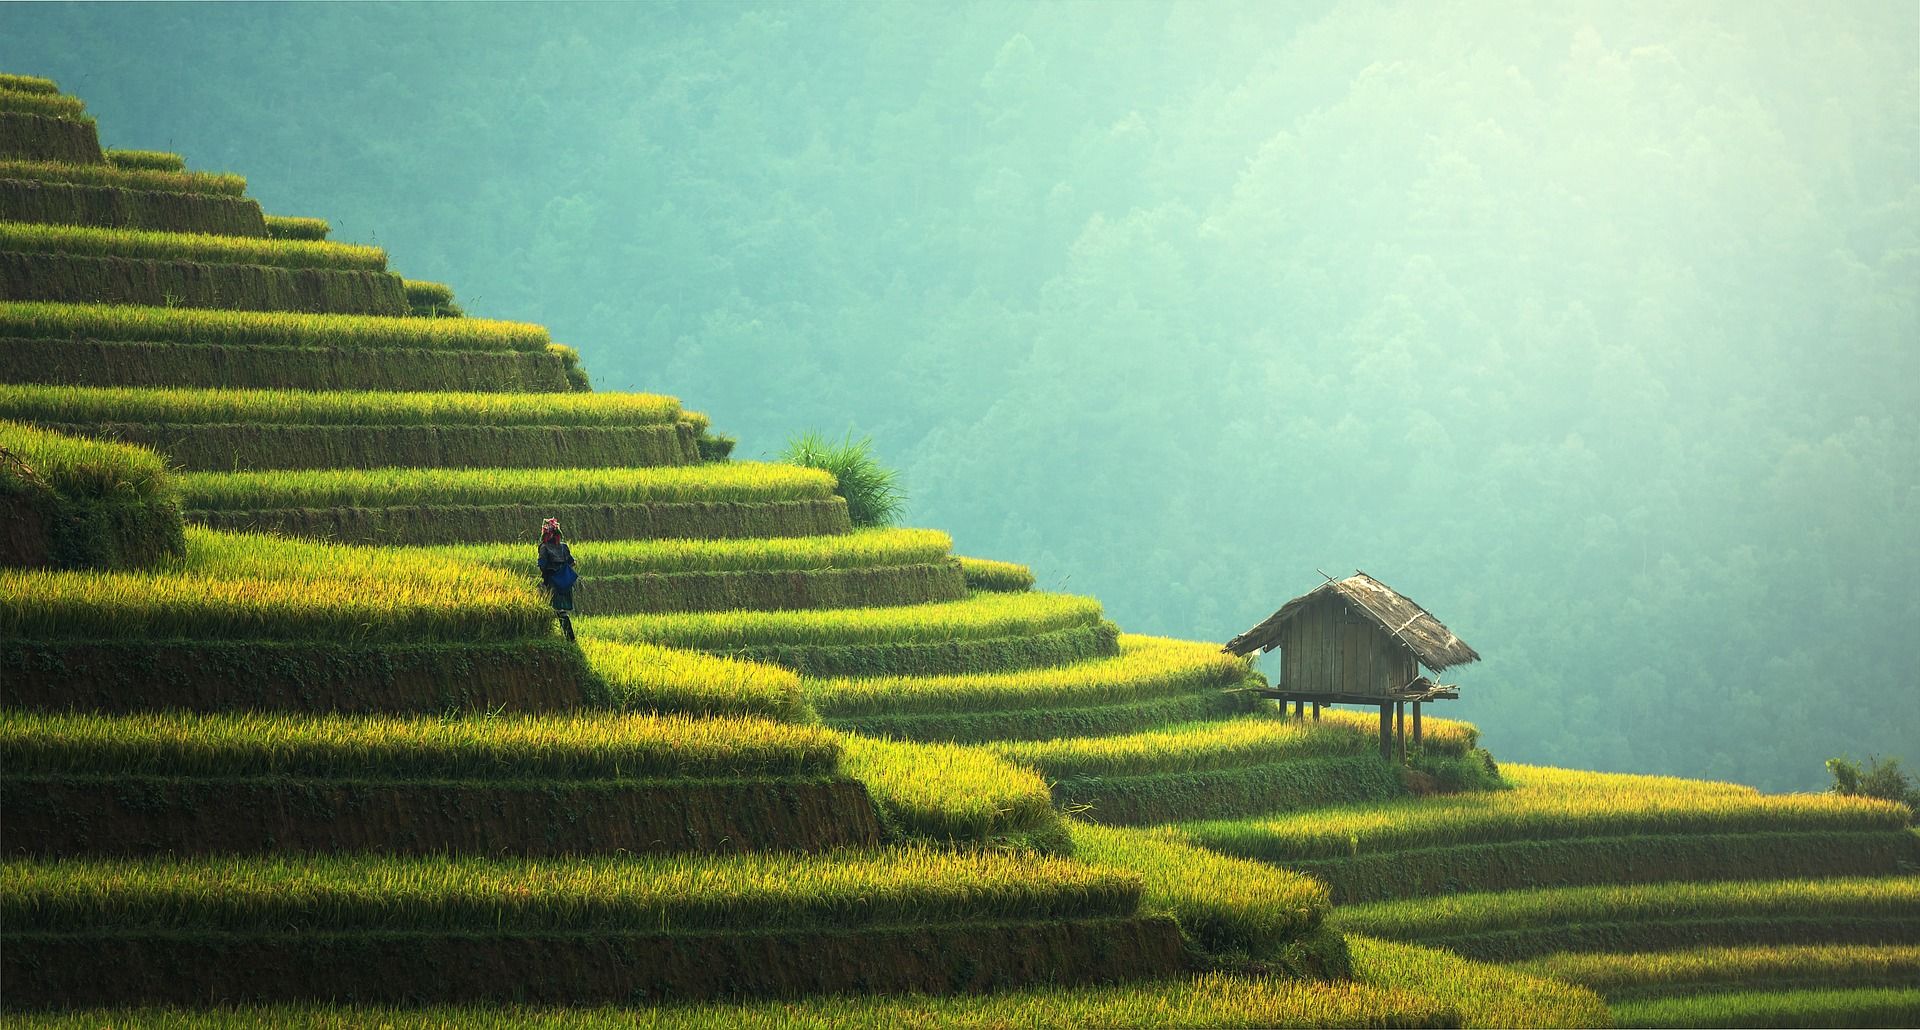 Vietnam Travel Tips: 15 Things You Need to Know